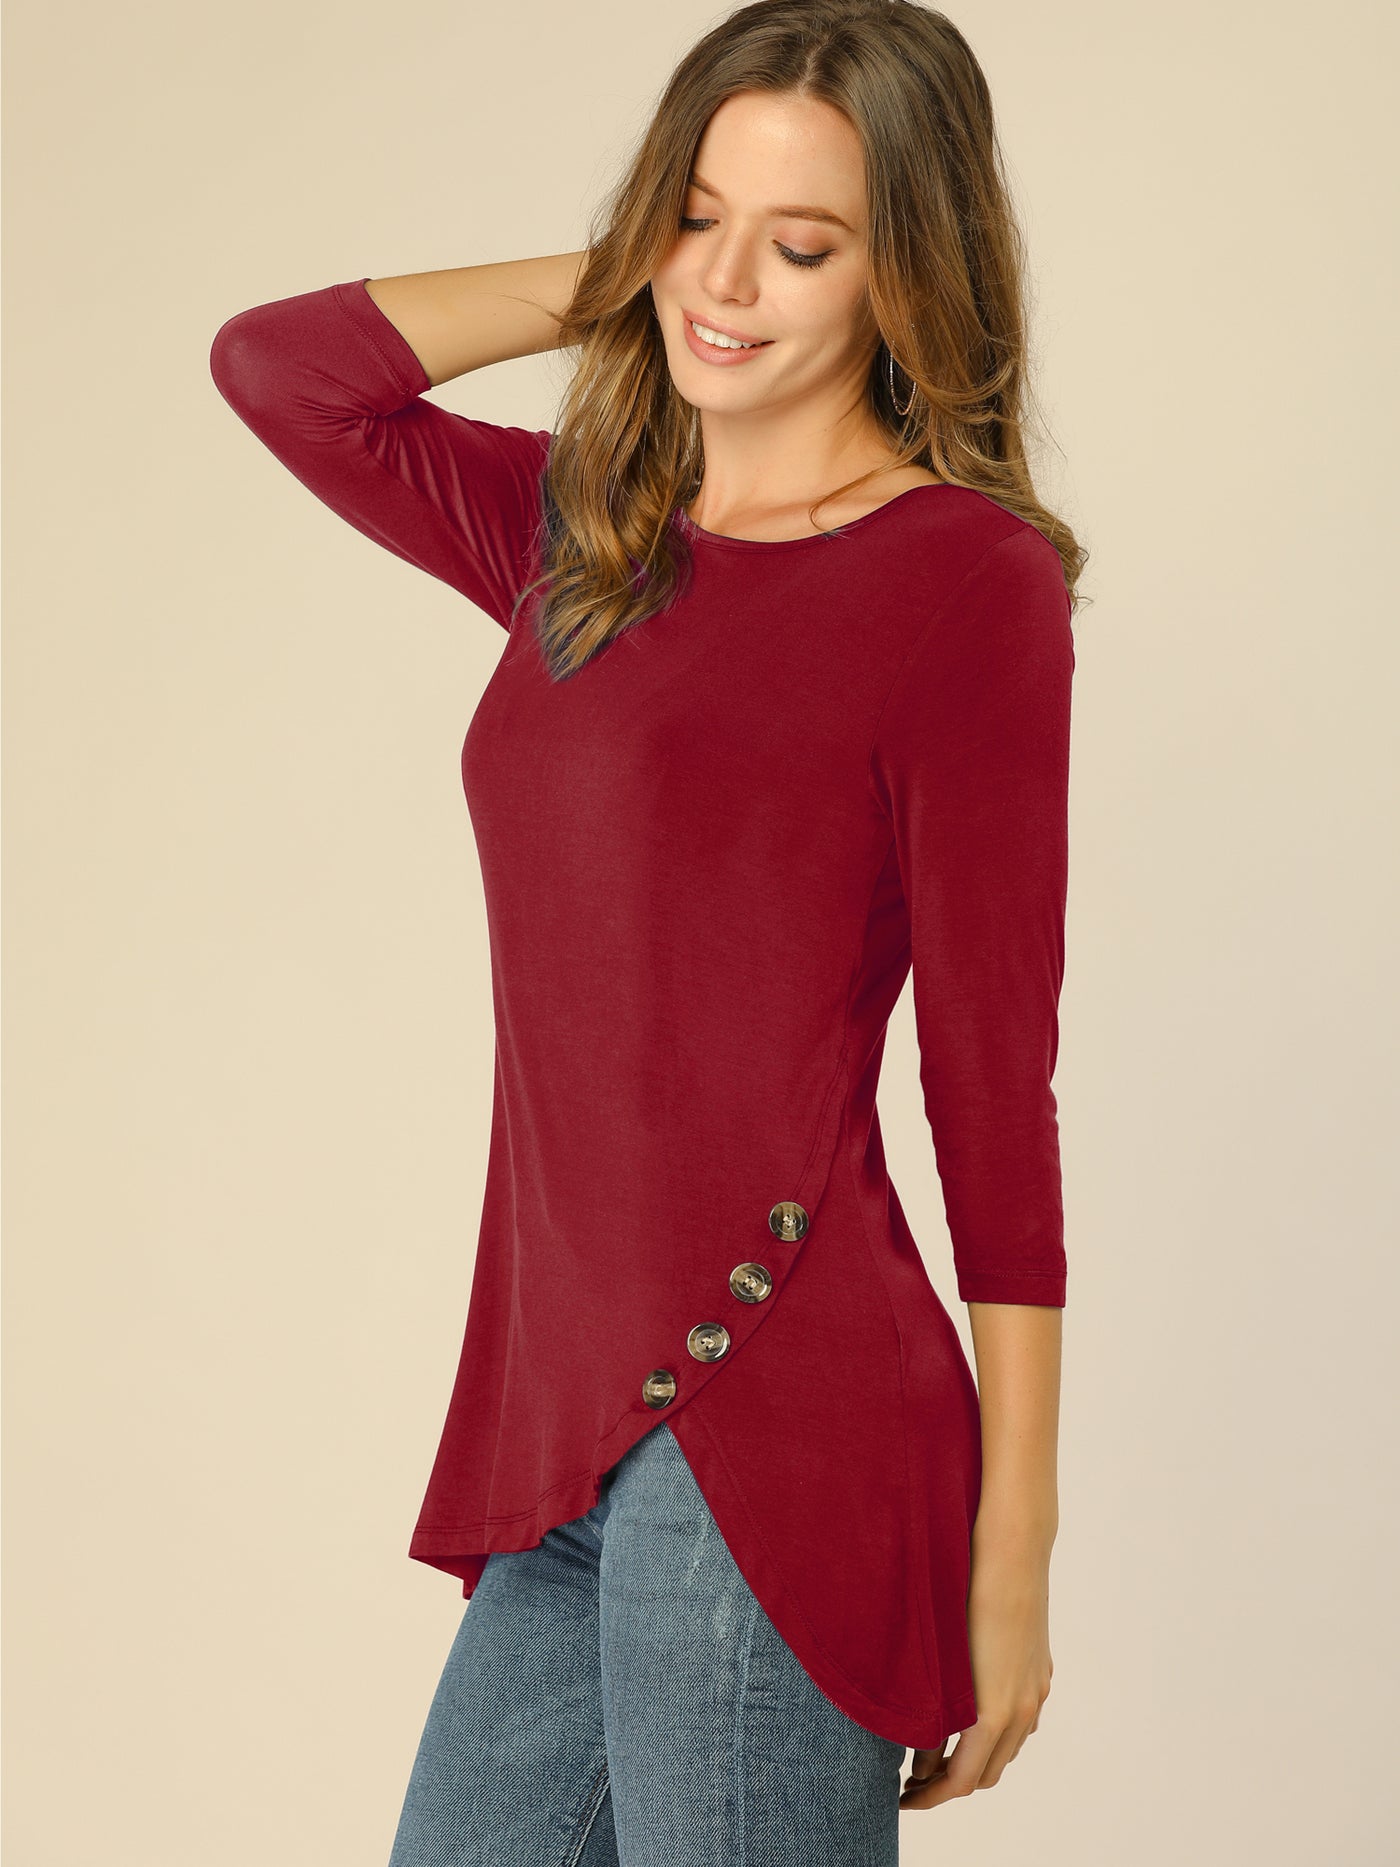 Allegra K 3/4 Sleeve Round Neck Button Decor Casual Stretchy Tunic Tops